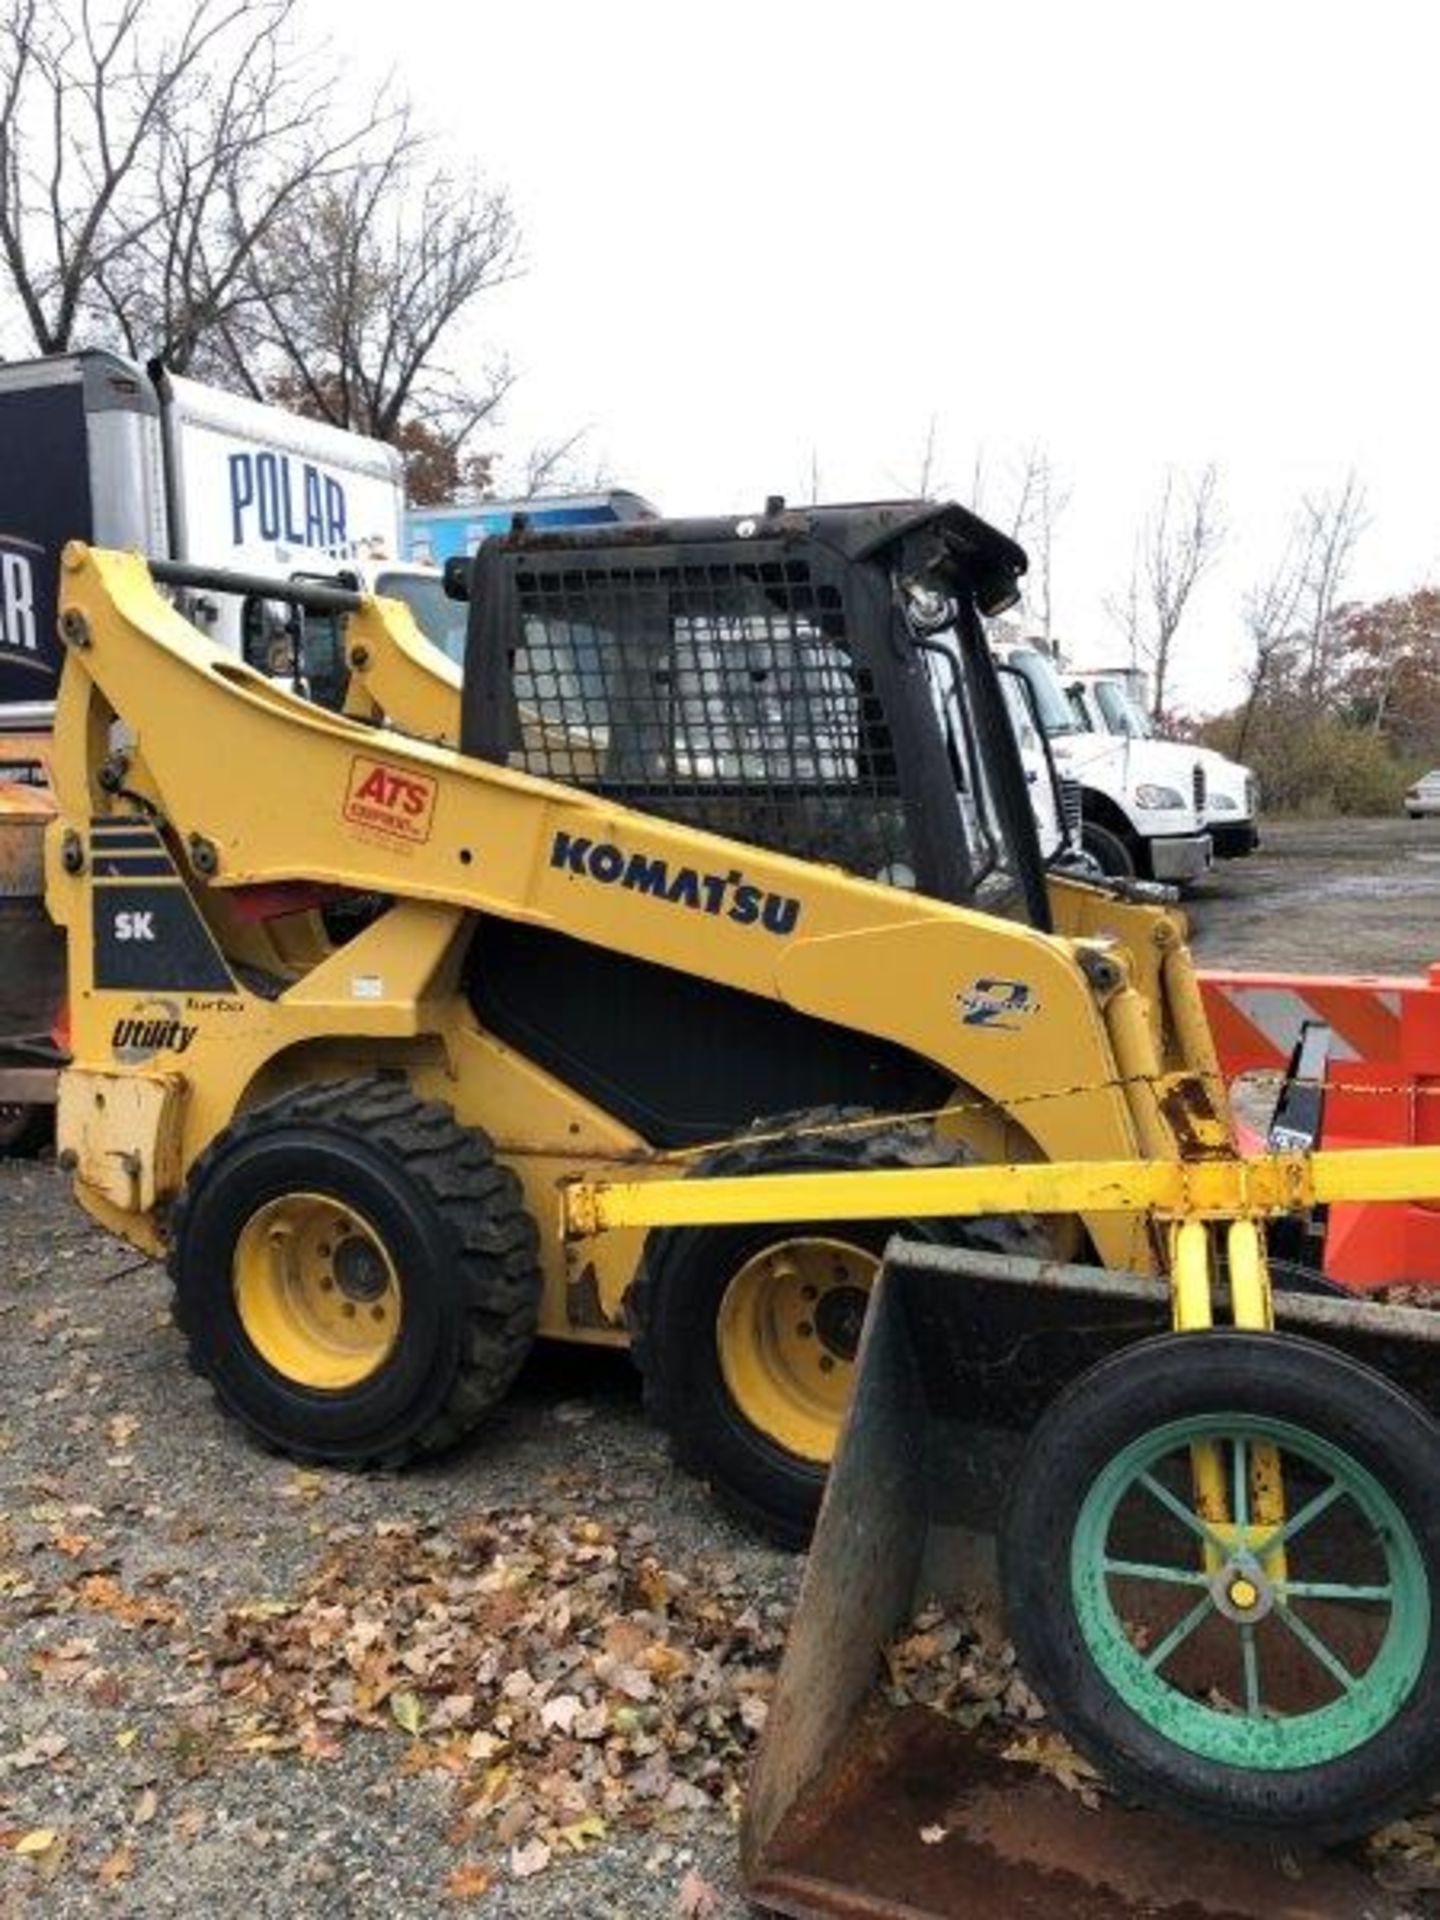 Komatsu Skid Steer #SK1026, S/N:A80436 w/Bucket Attachments & Forks S/N: A80436 - Image 4 of 7